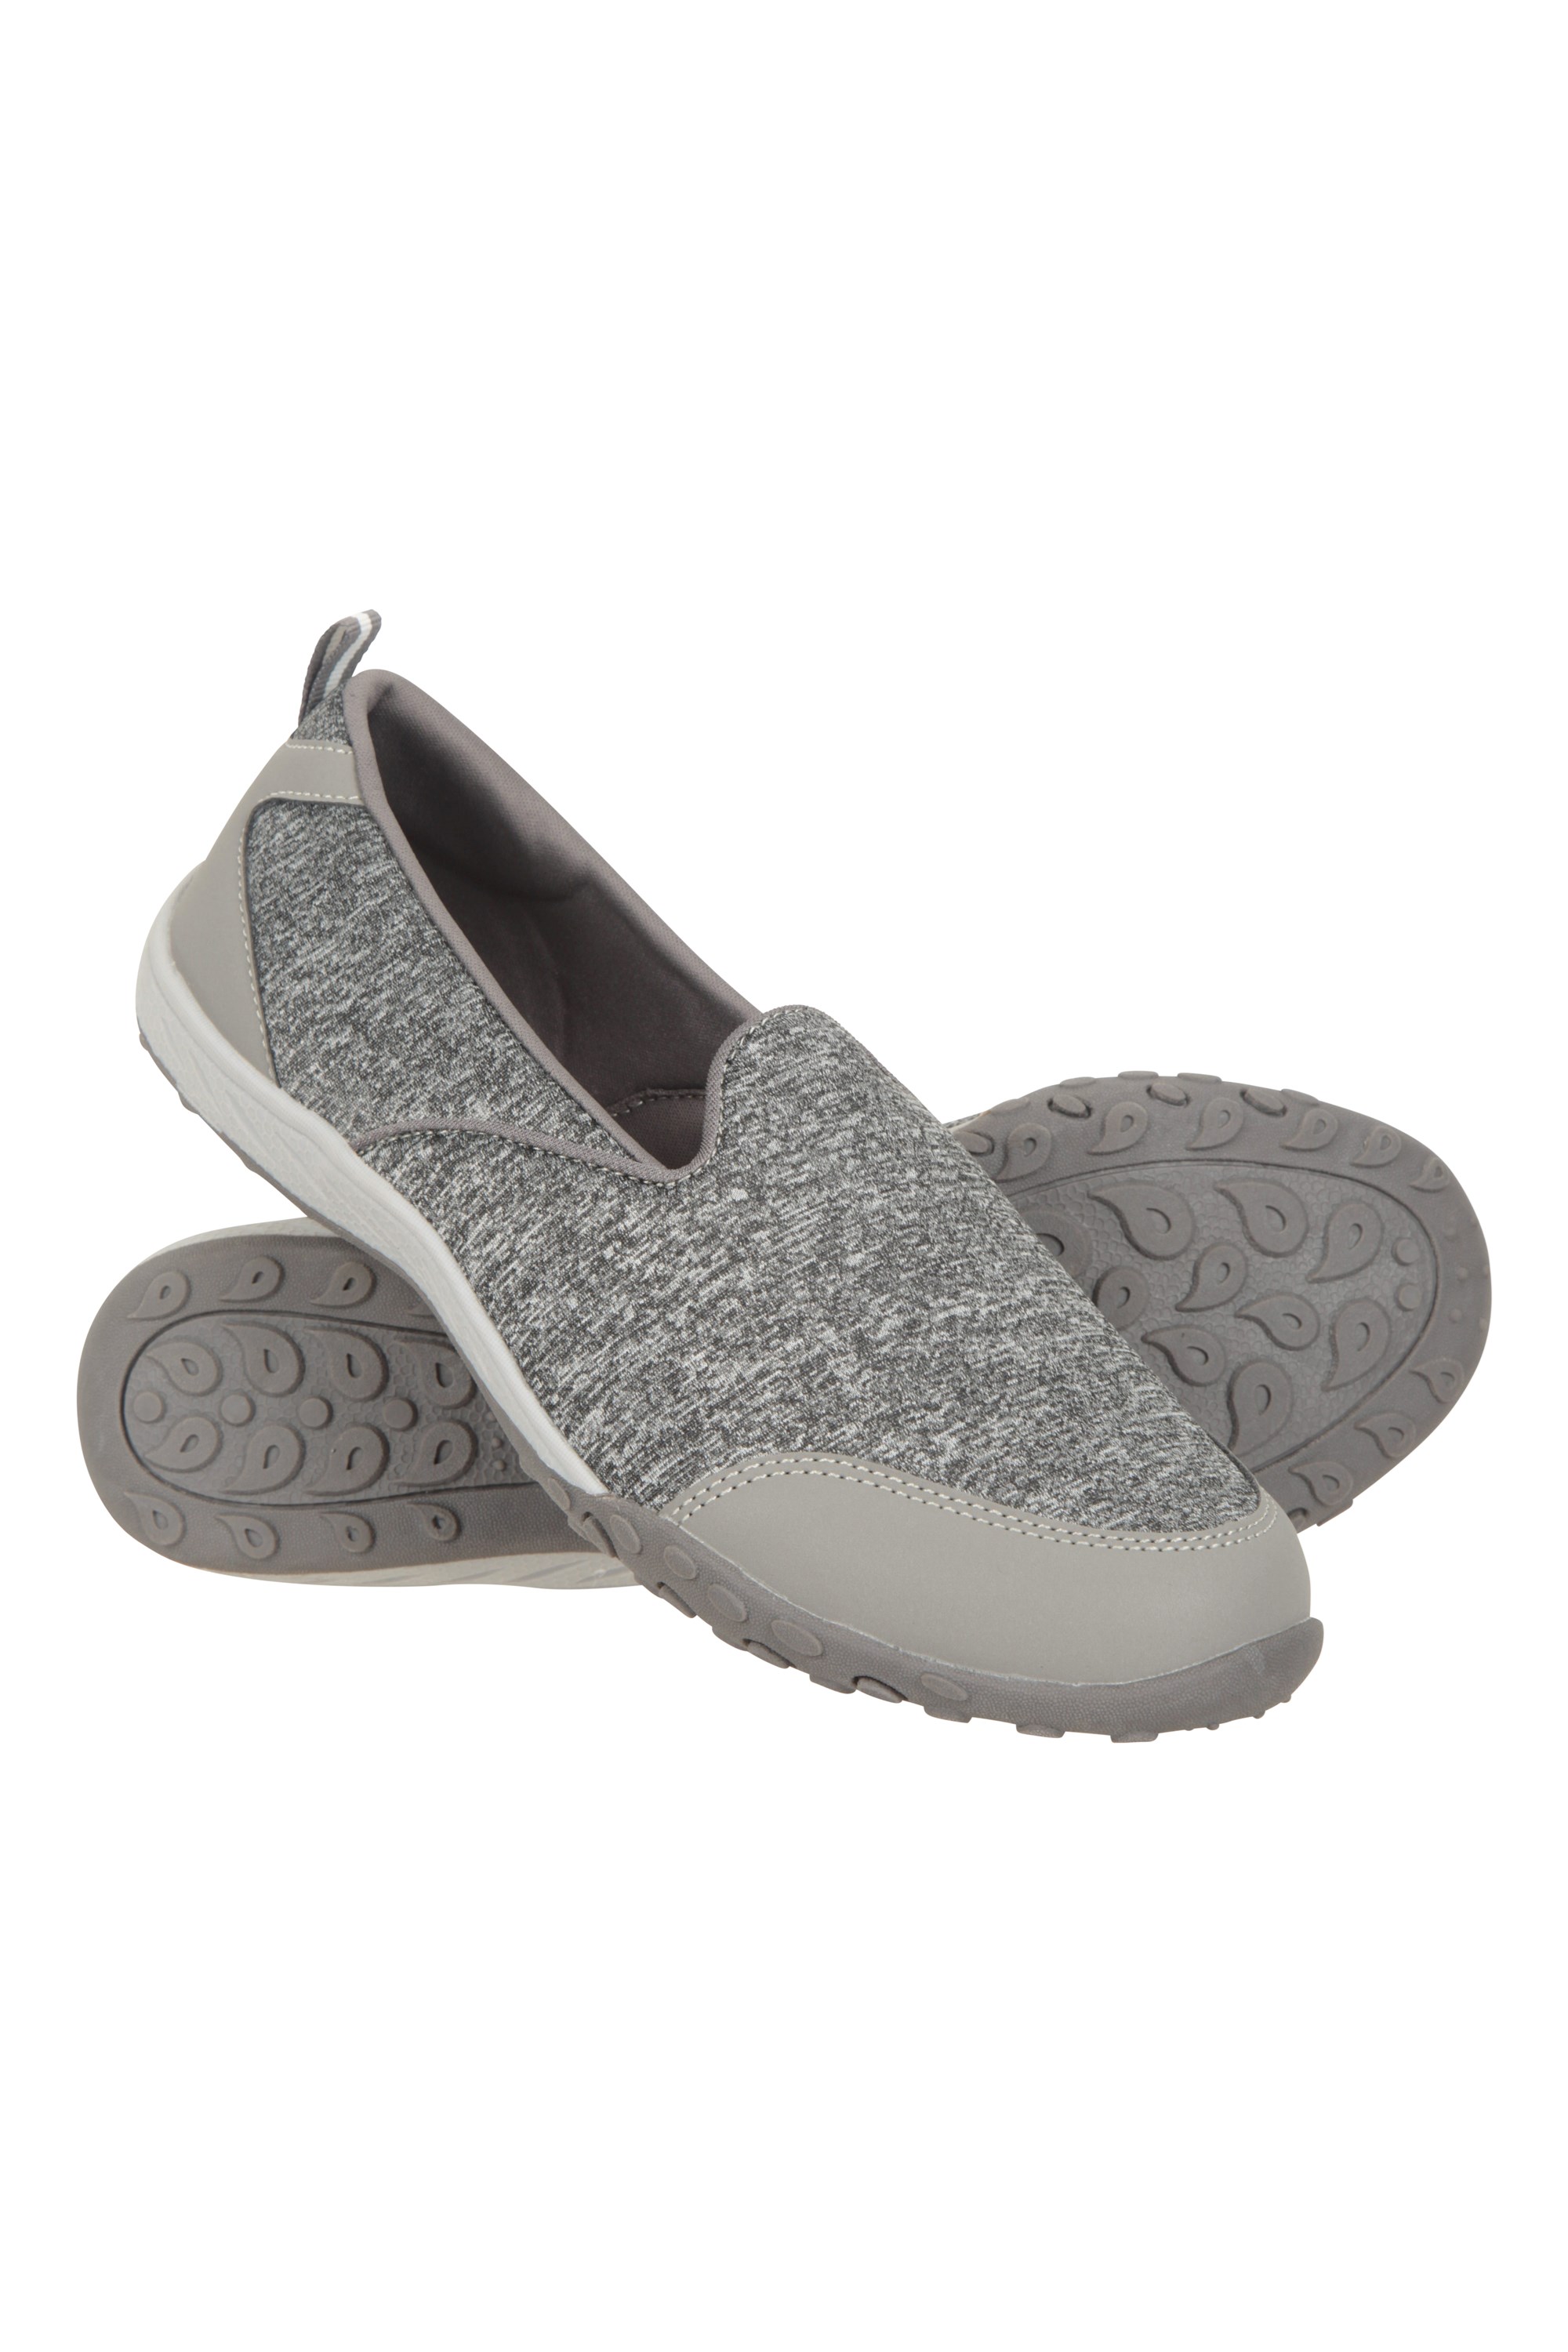 Lighthouse II Womens Casual Shoes - Grey